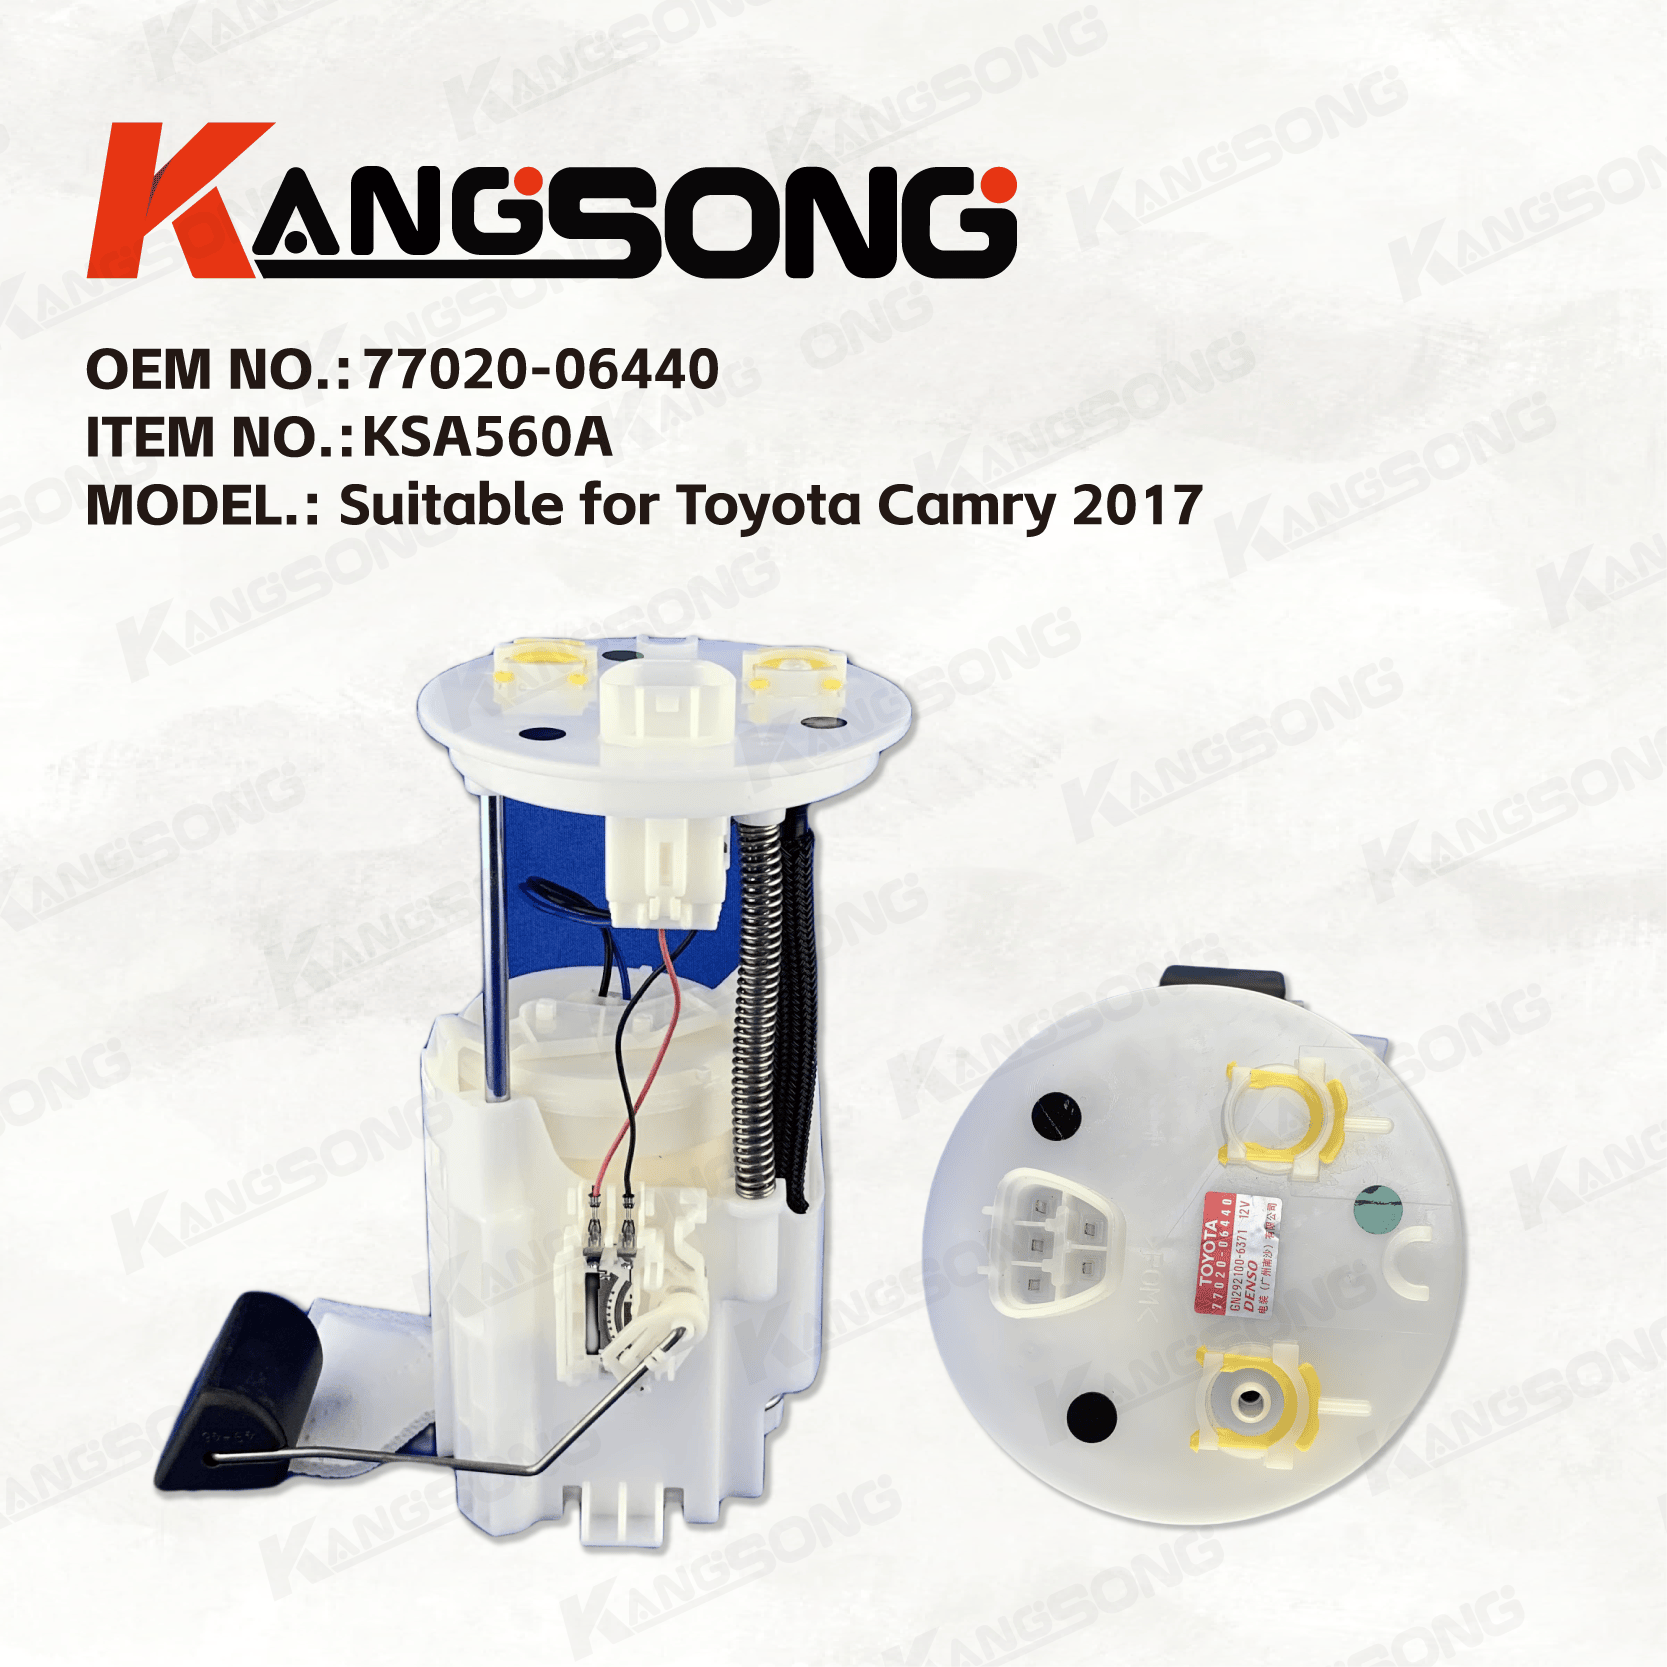 Applicable to Toyota Camry 2017 high quality automotive/77020-06440/Fuel Pump Assembly/KS-A560A